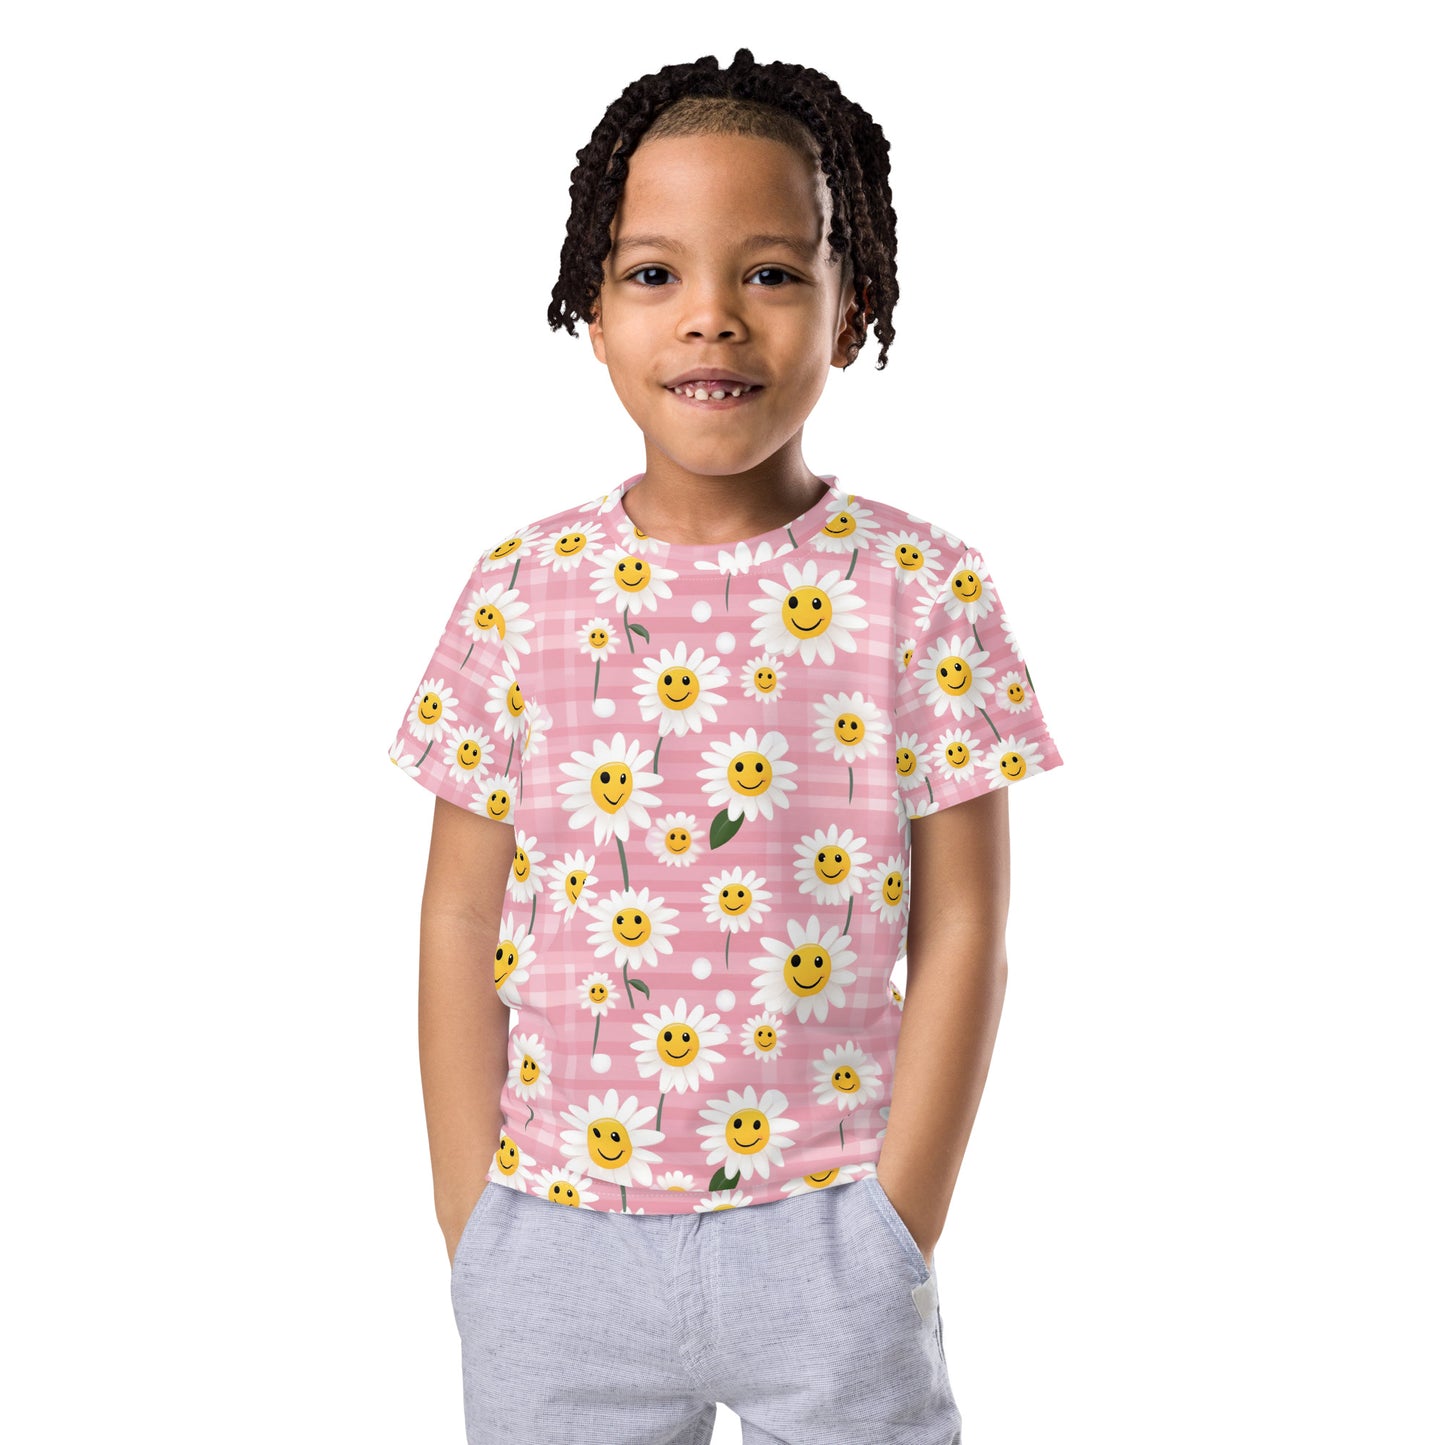 Happy Daisy Kids Tshirt (2T-7), Cute Face Pink Smiling Flowers Floral Toddler Graphic Girls Boys Aesthetic Crewneck Tee Top Gift Shirt